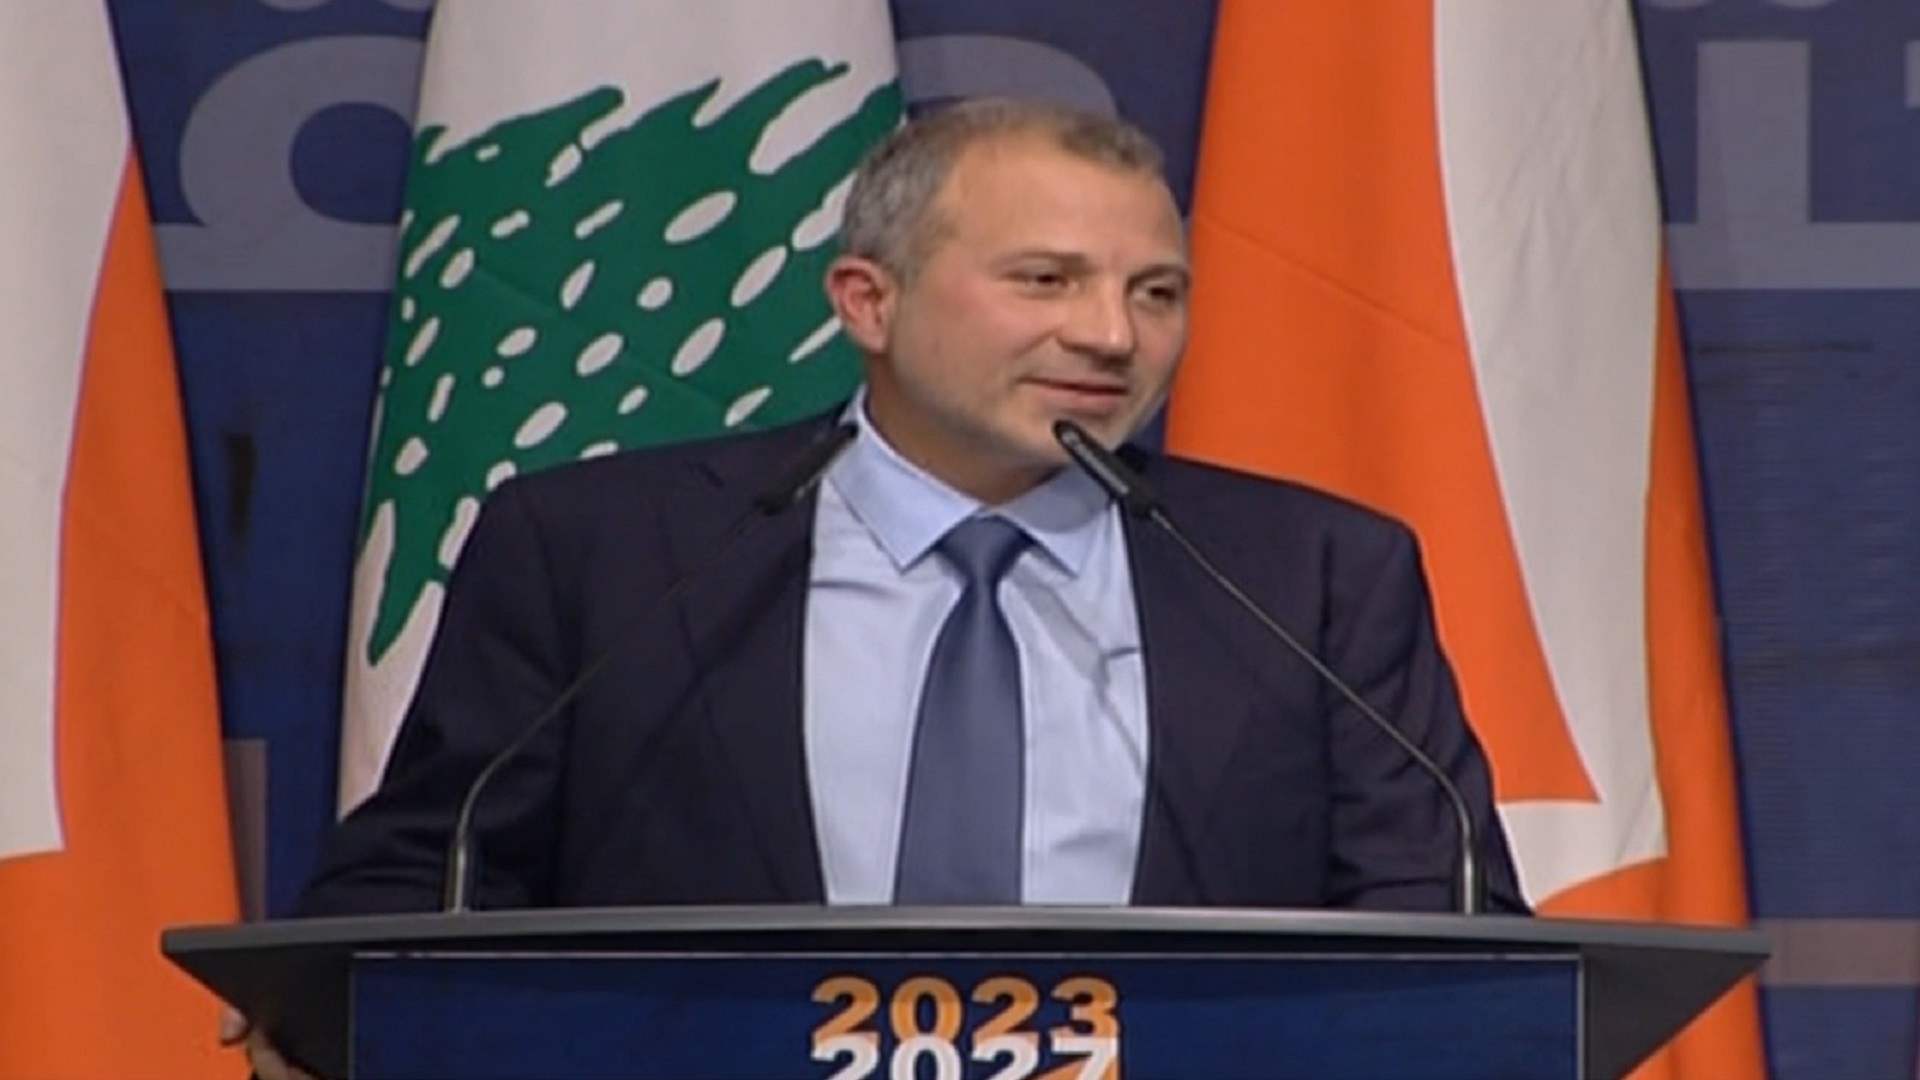 Conditions and positions: Gebran Bassil&#39;s backtracking on dialogue puts Berri&#39;s initiative at risk